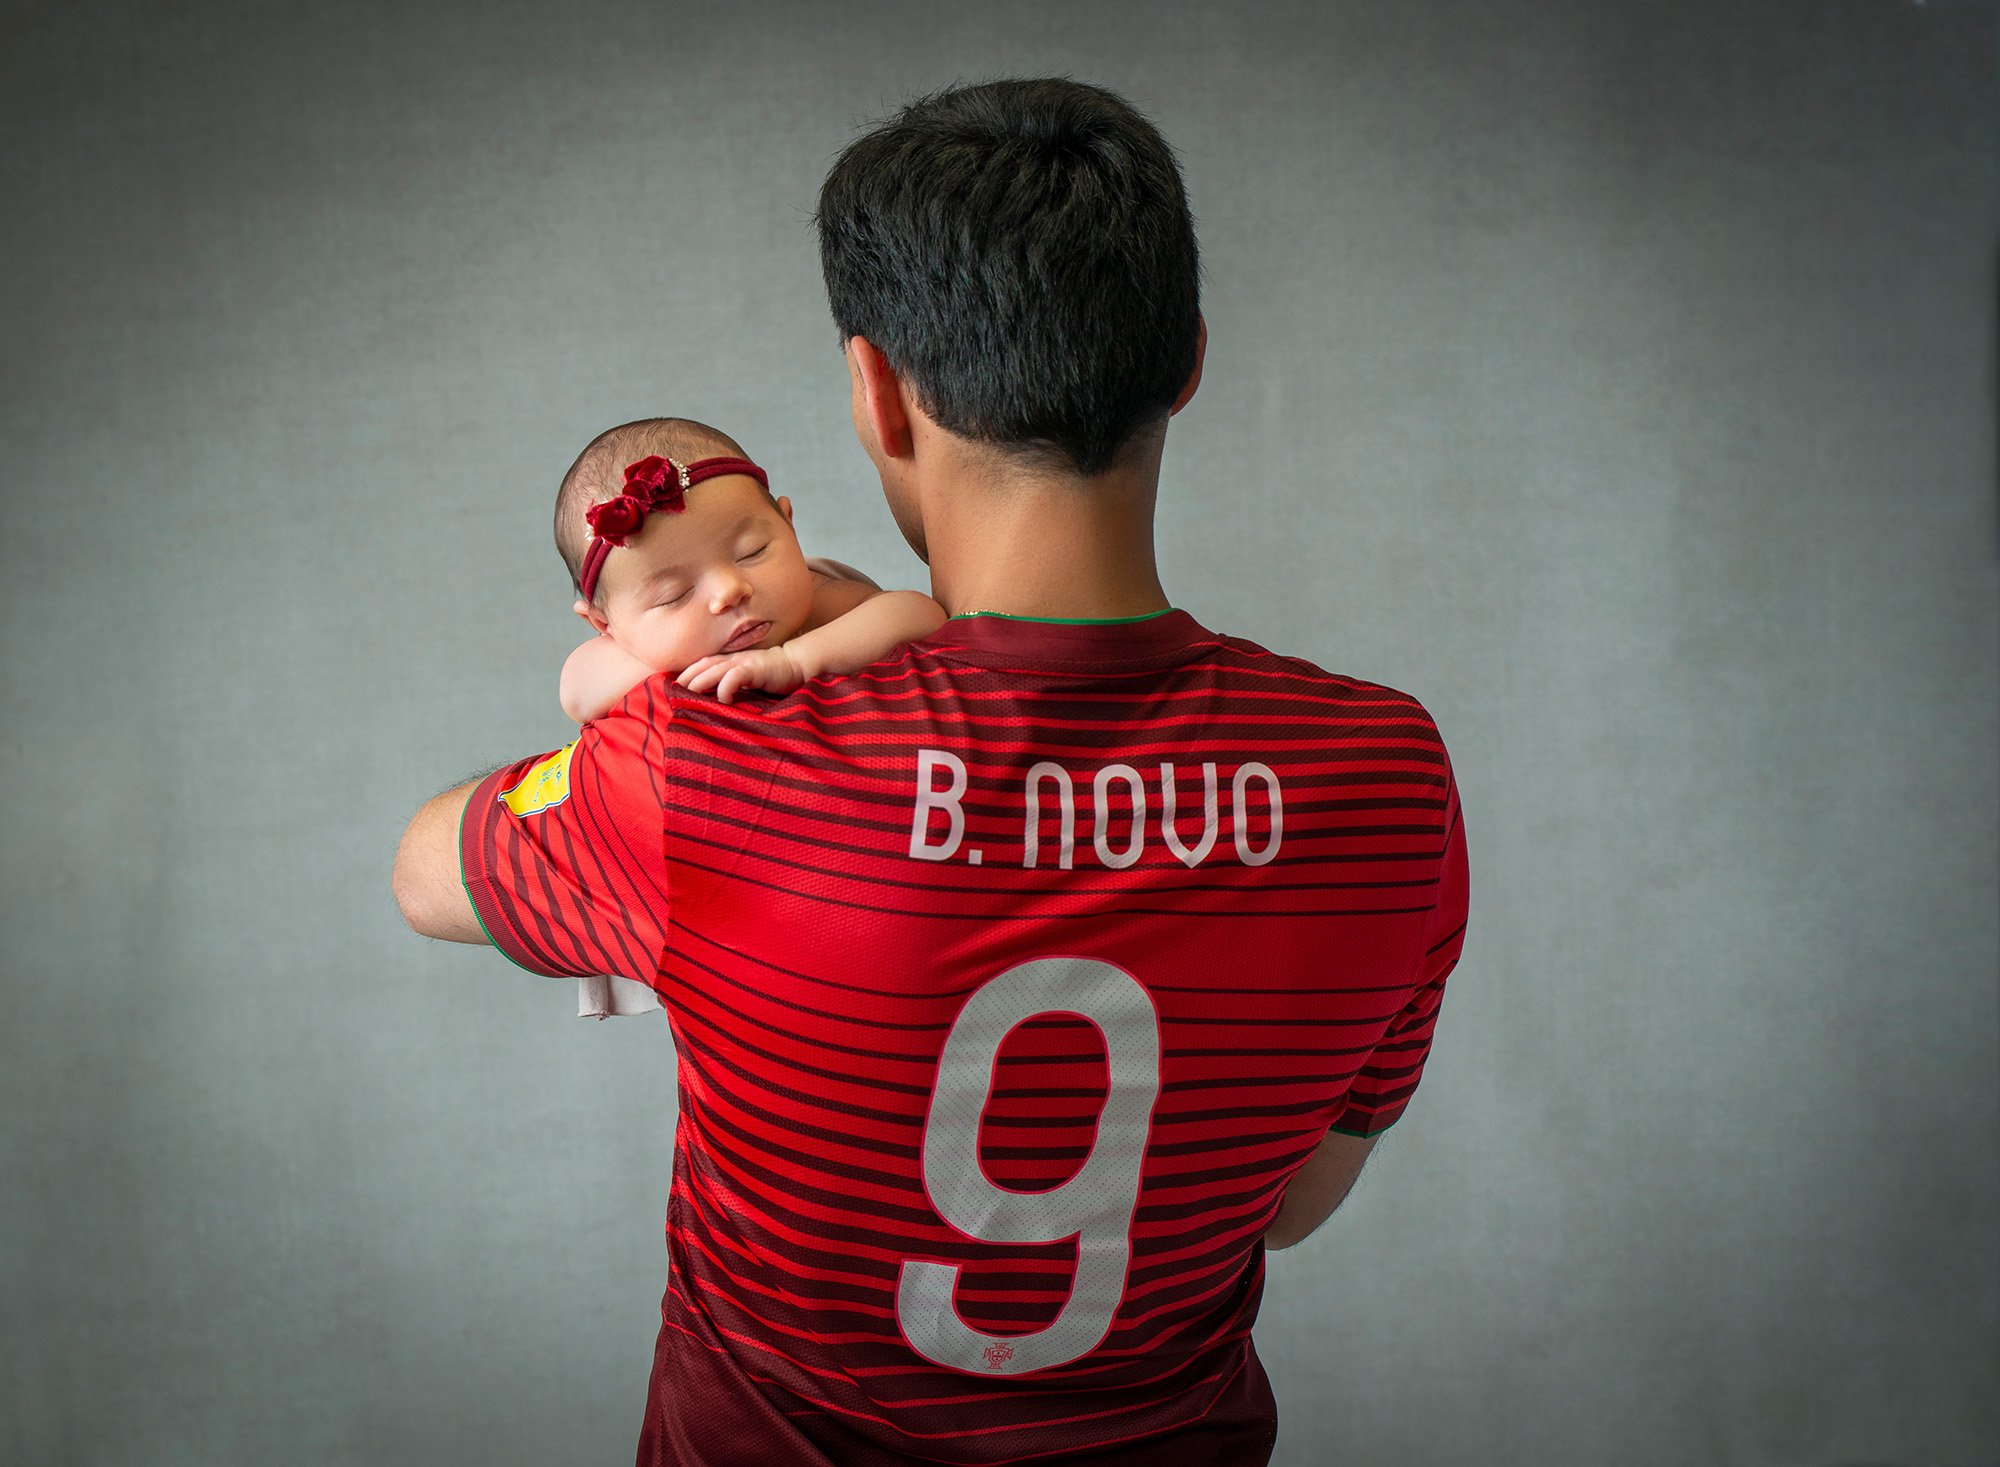 newborn baby girl wearing red bow asleep in dad's arms while he shows off his favorite sports jersey